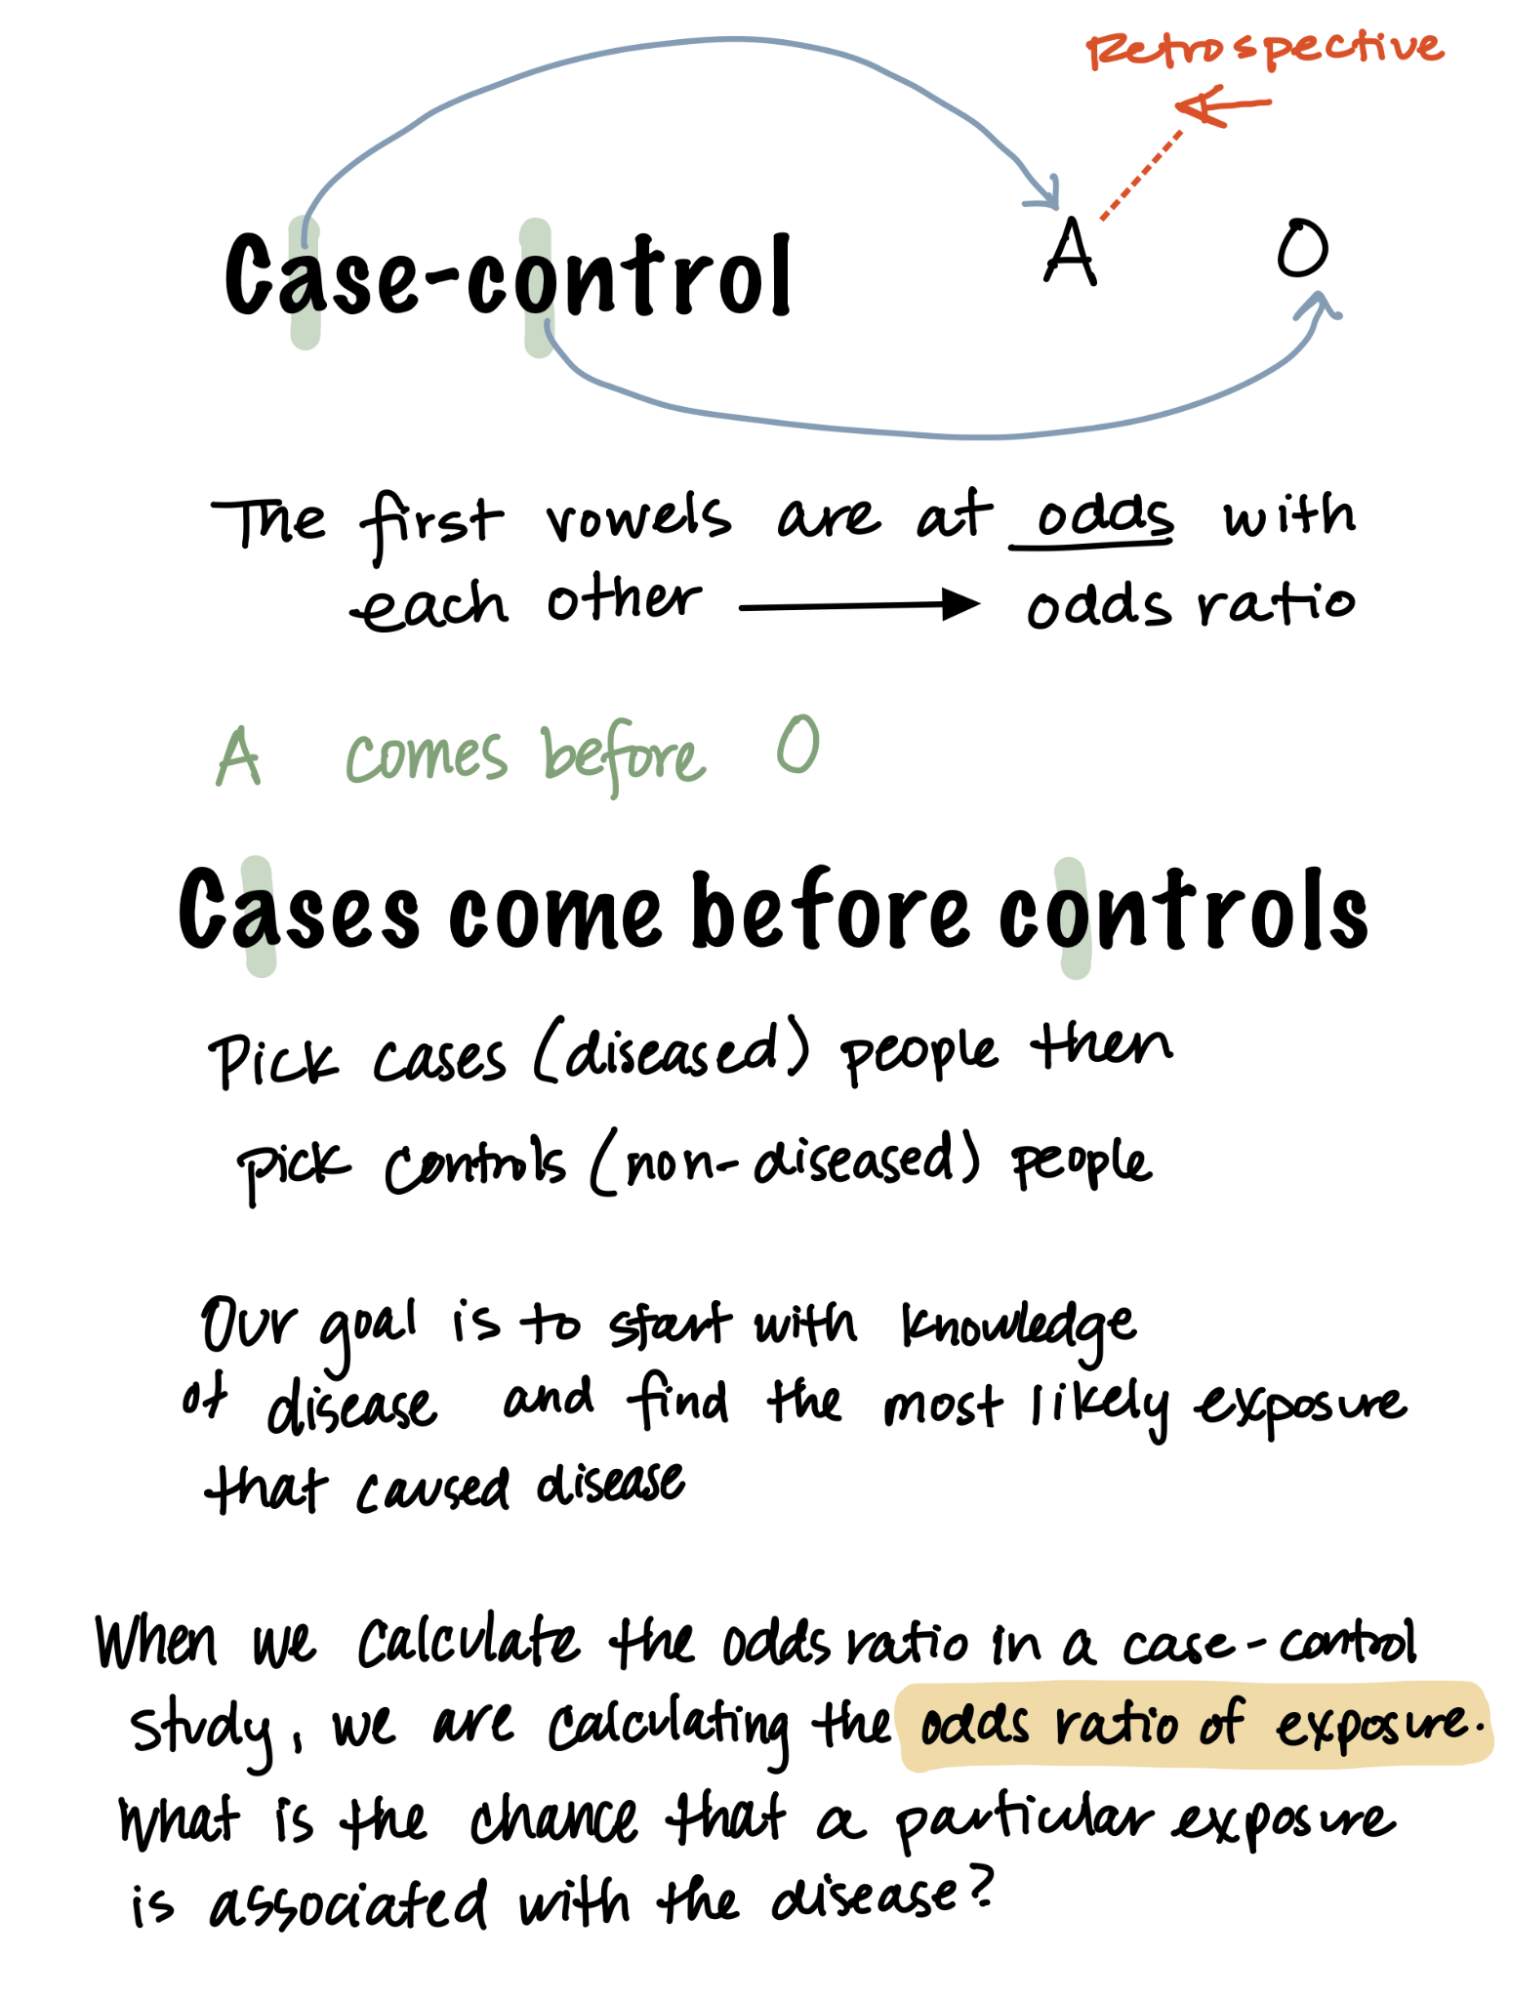 Case-Control where the A in 'case' and the O in 'control' are highlighted. A is retrospective. The first vowels are at odds with each other (odds ratio). A comes before O. Cases come before controls. Pick cases (diseased) people then pick controls (non-diseased) people. Our goal is to start with knowledge of disease and find the most likely exposure that caused disease. When we calculate the odds ratio in a case-control study, we are calculating the odds ratio of exposure. What is the chance that a particular exposure is associated with the disease?